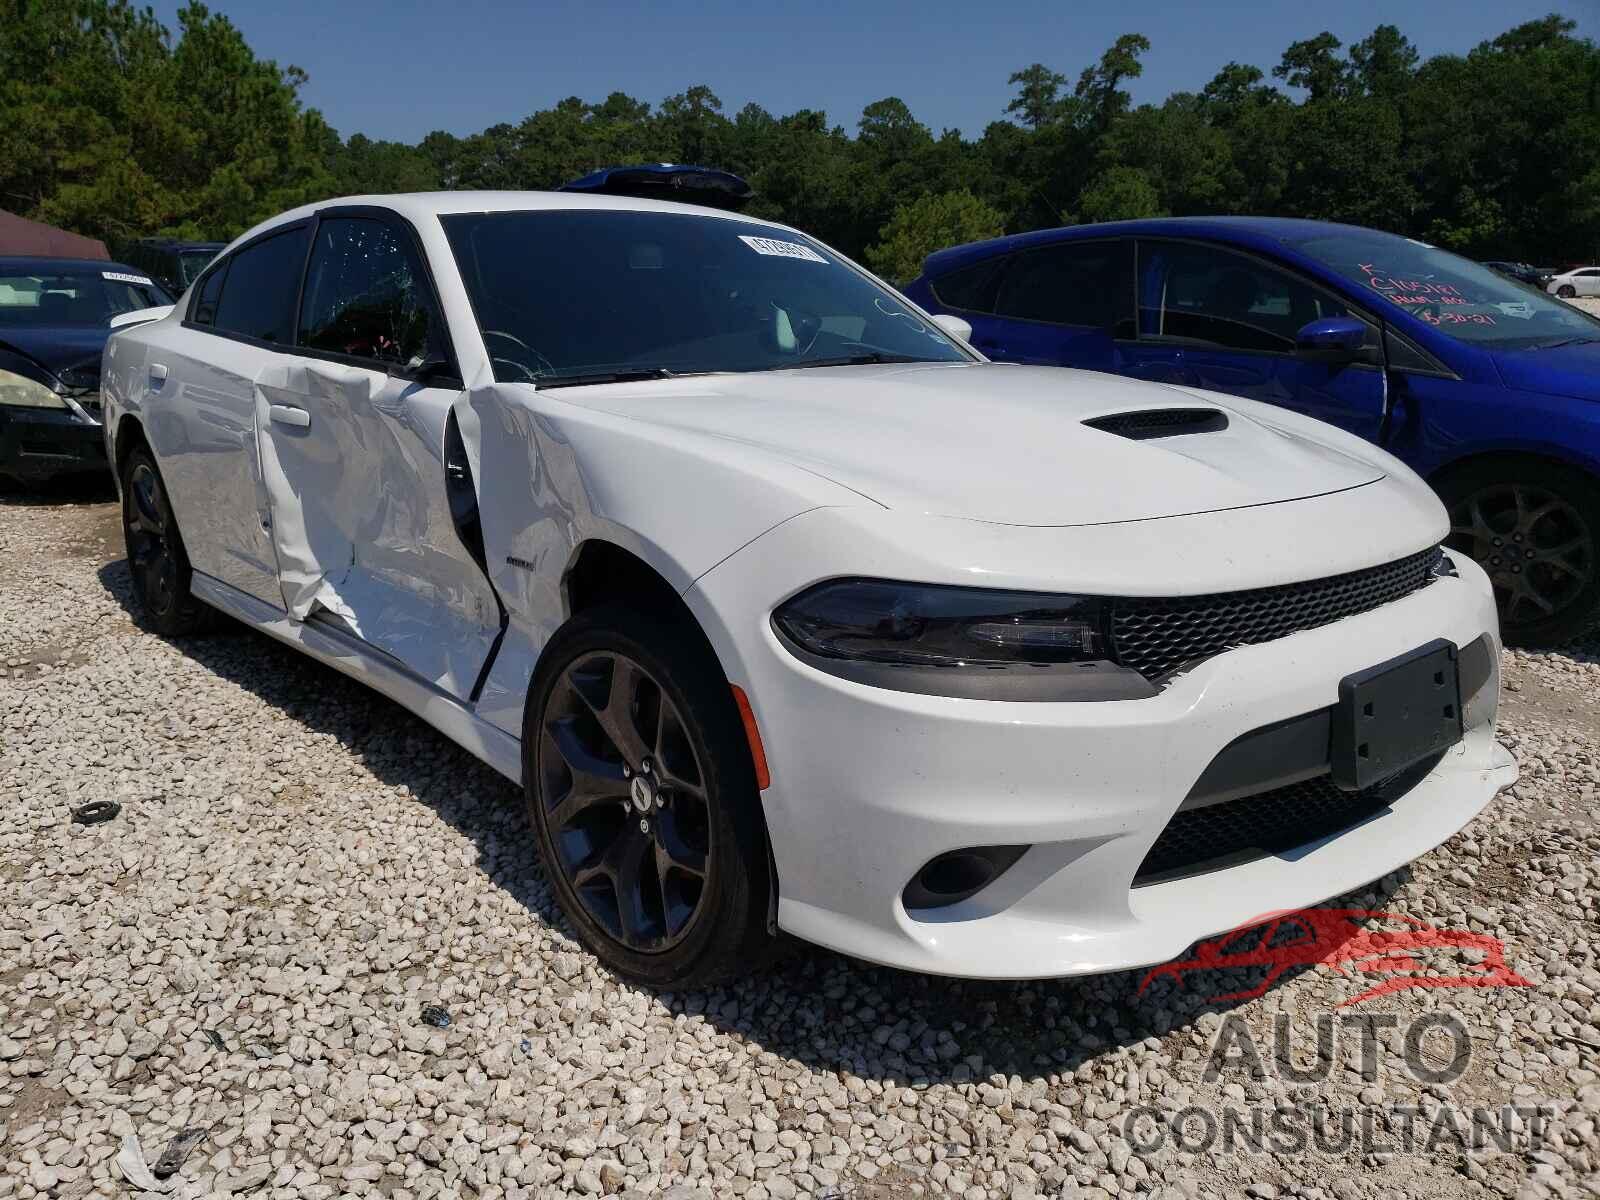 2019 CHARGER DODGE